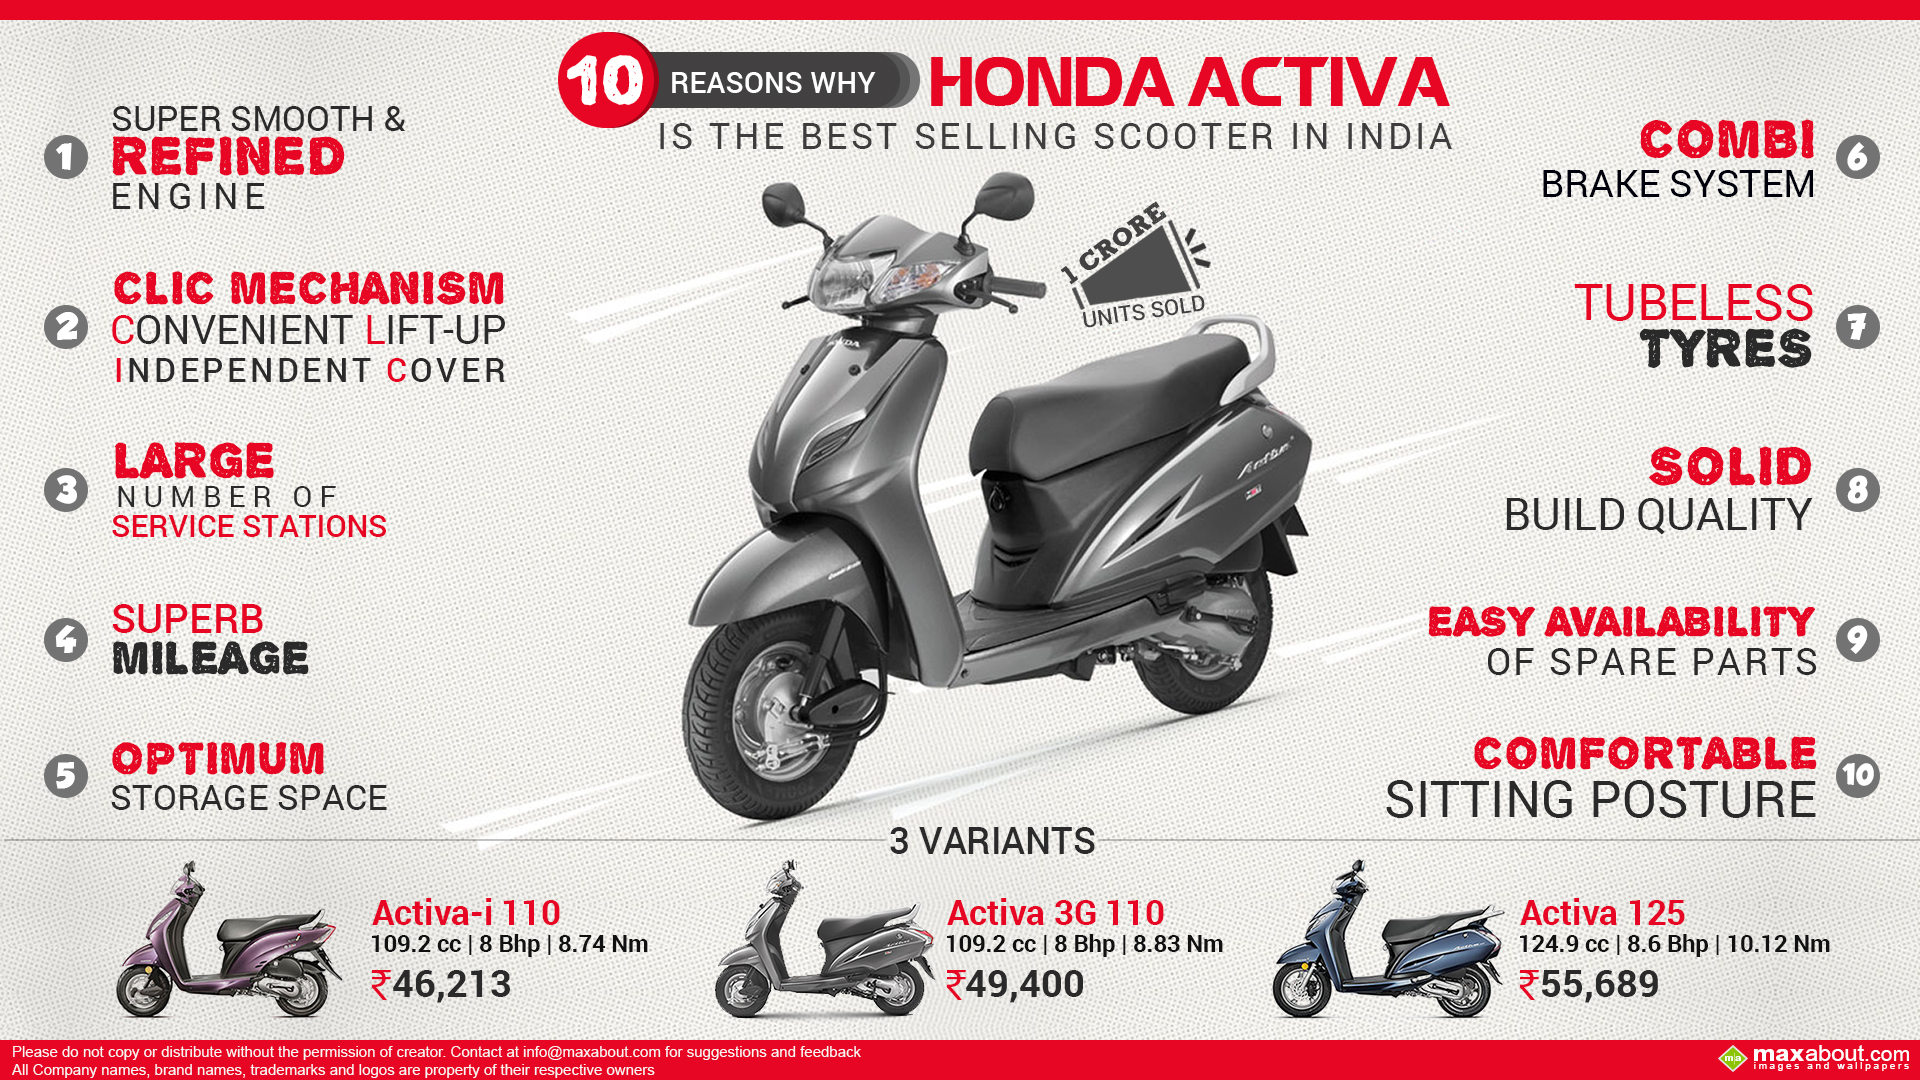 10 Reasons Why Honda Activa is the Best 